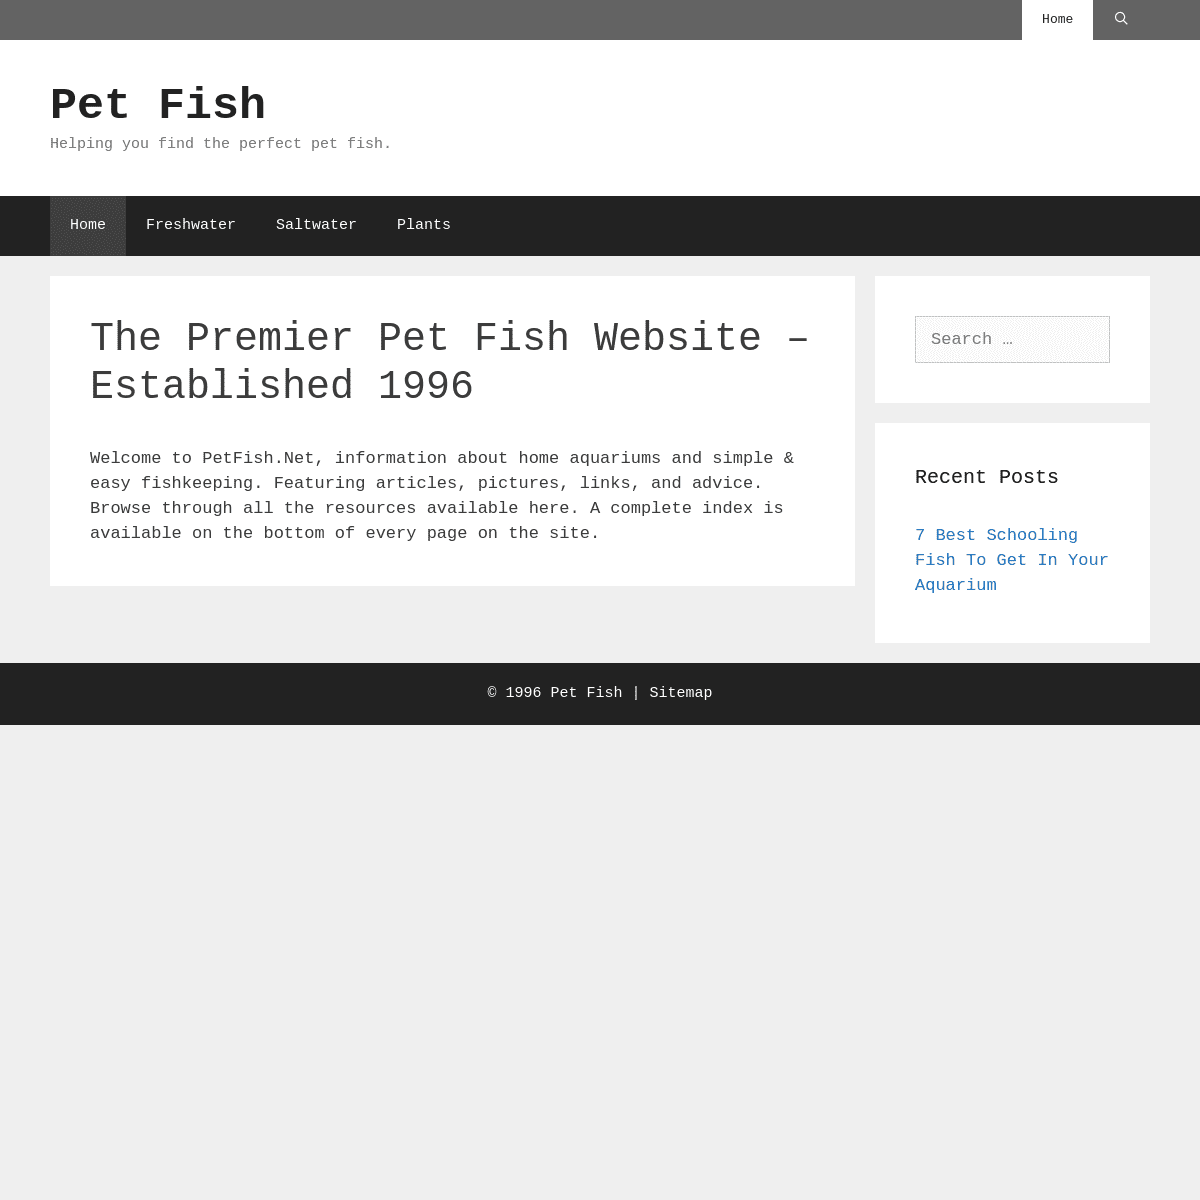 A complete backup of https://petfish.net